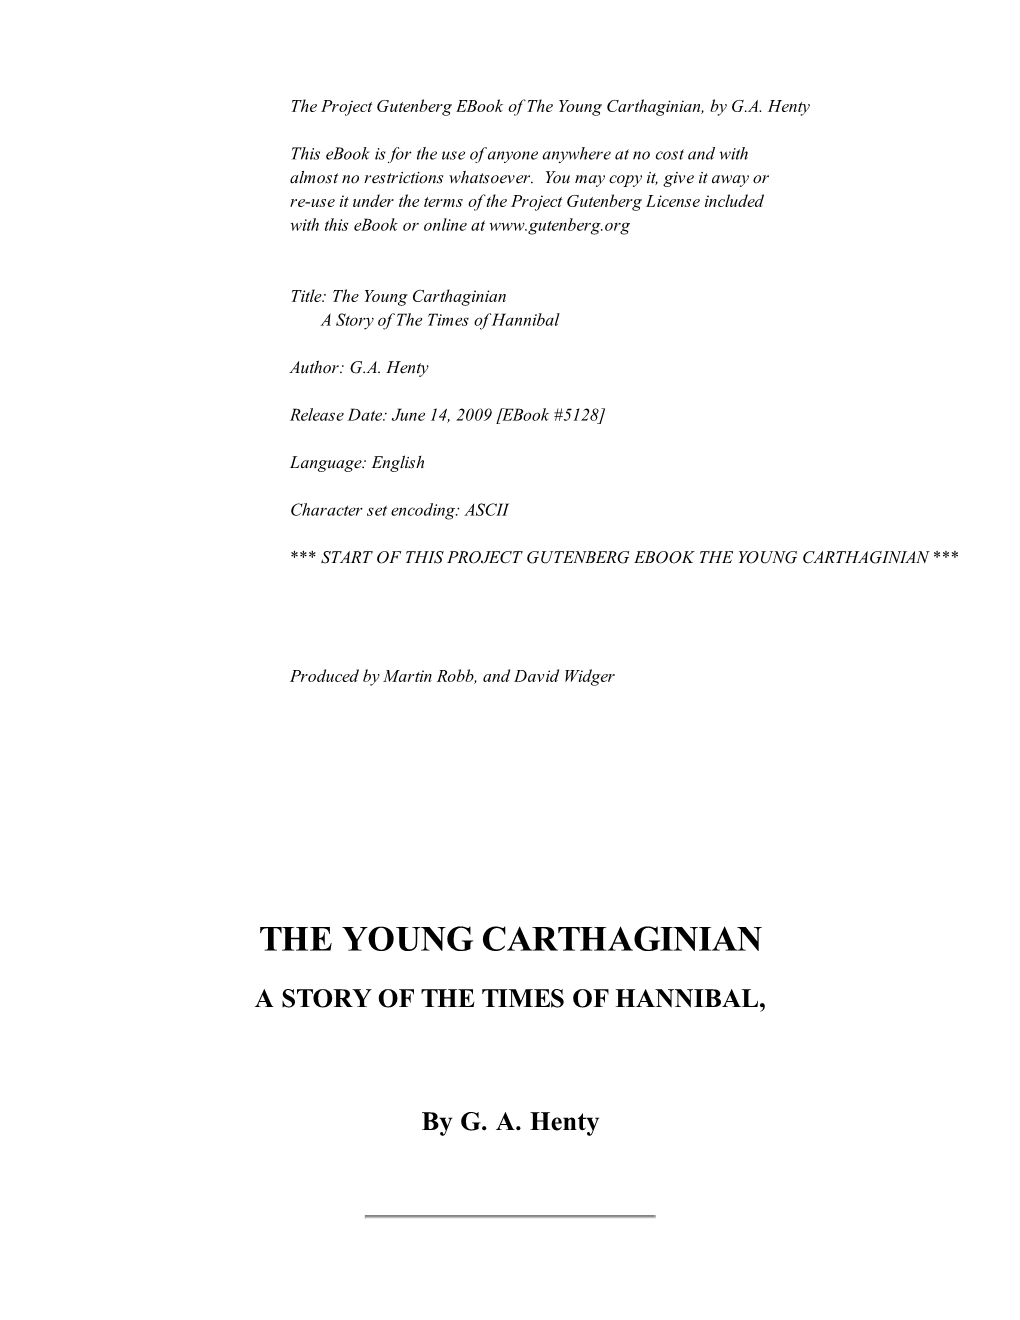 The Young Carthaginian, by G.A